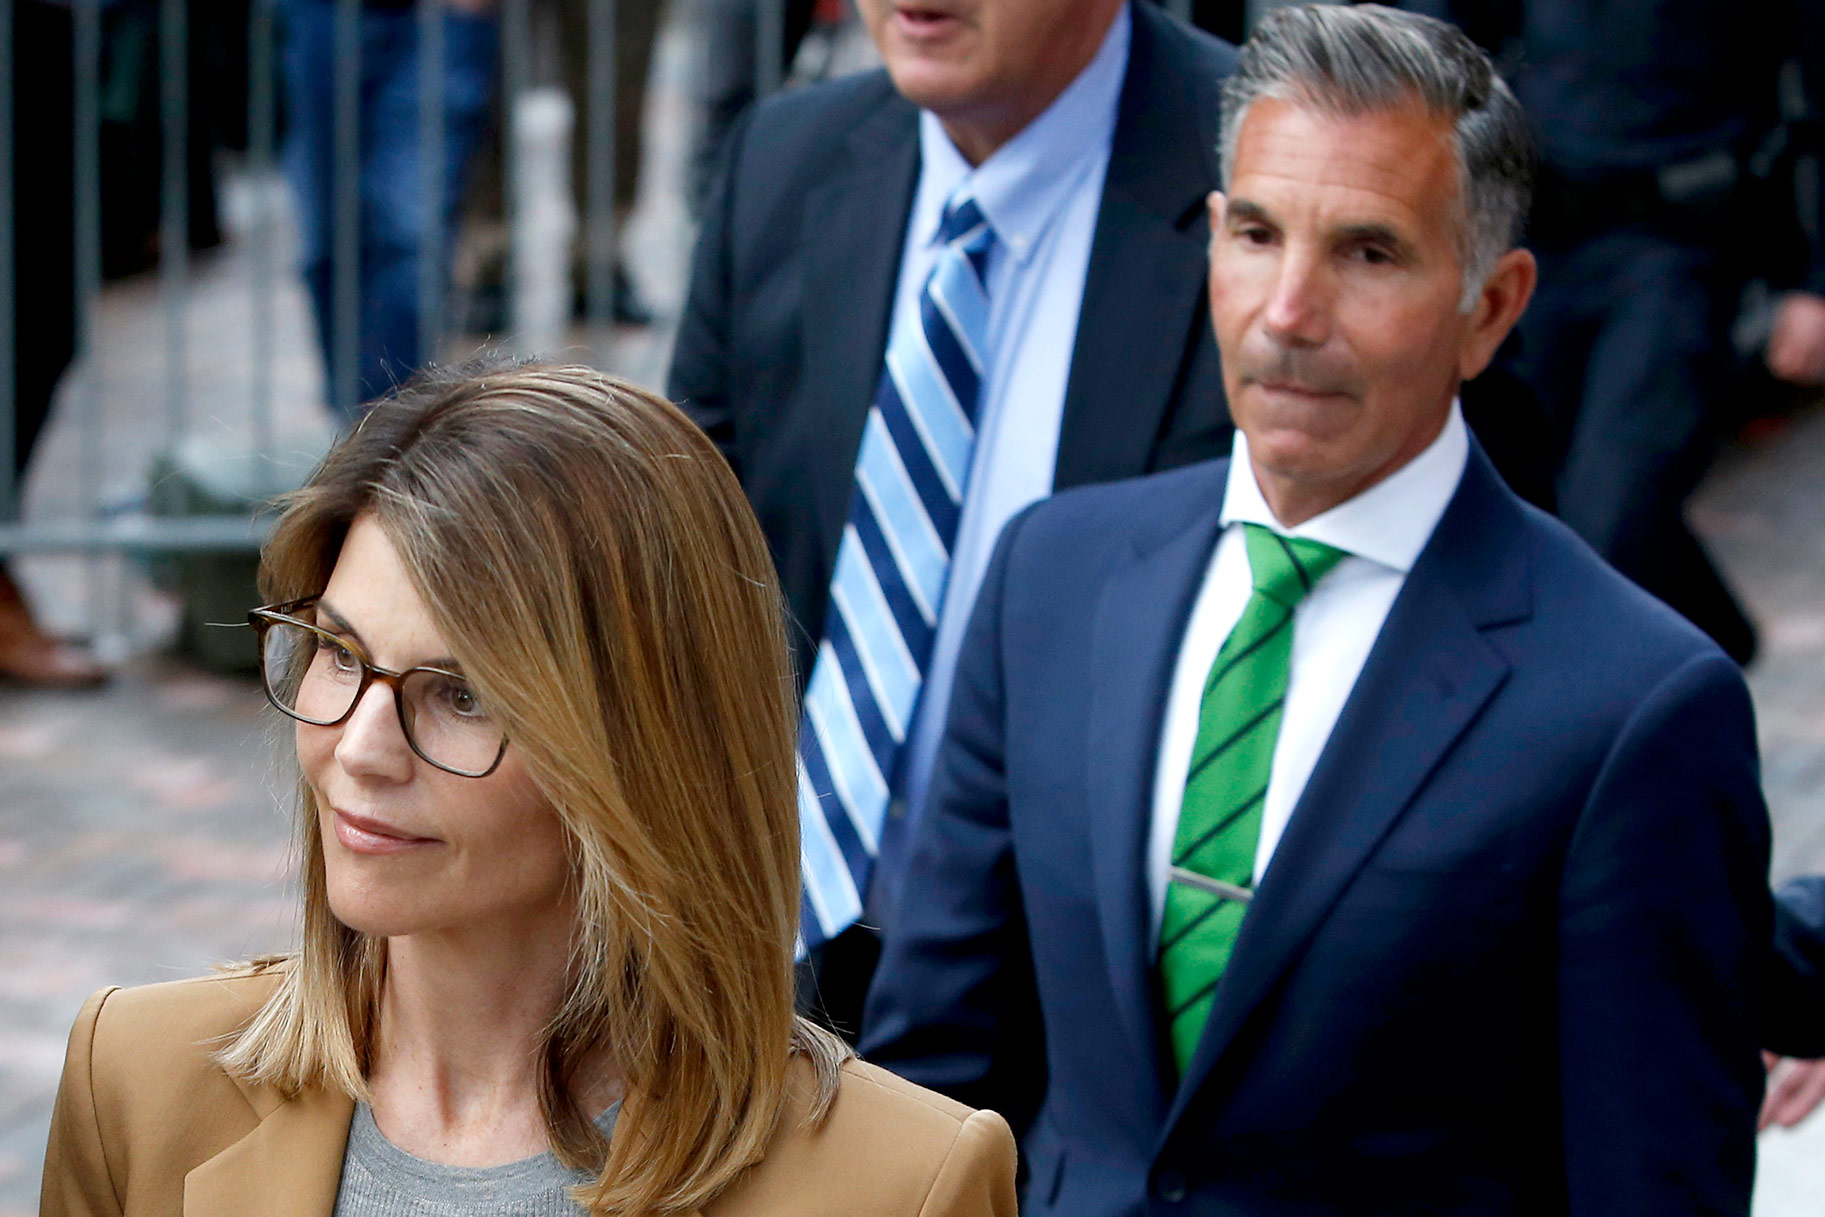 Lori Loughlin thought she was breaking rules, not laws